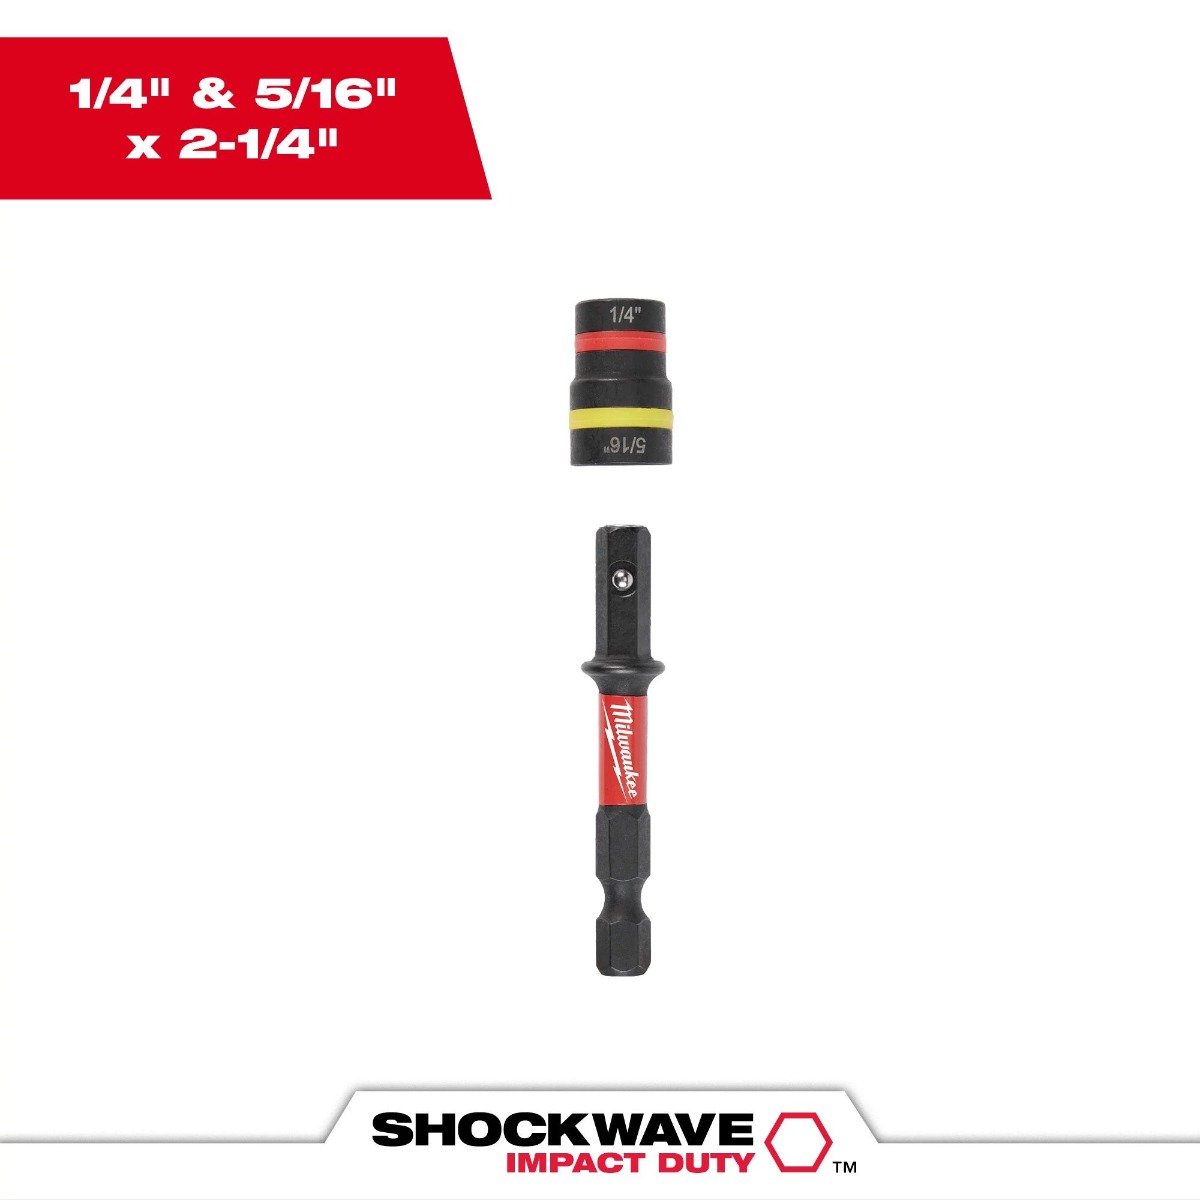 SHOCKWAVE Impact Duty™ 1/4" and 5/16" x 2-1/4" QUIK-CLEAR™ 2-in-1 Magnetic Nut Driver BULK 25